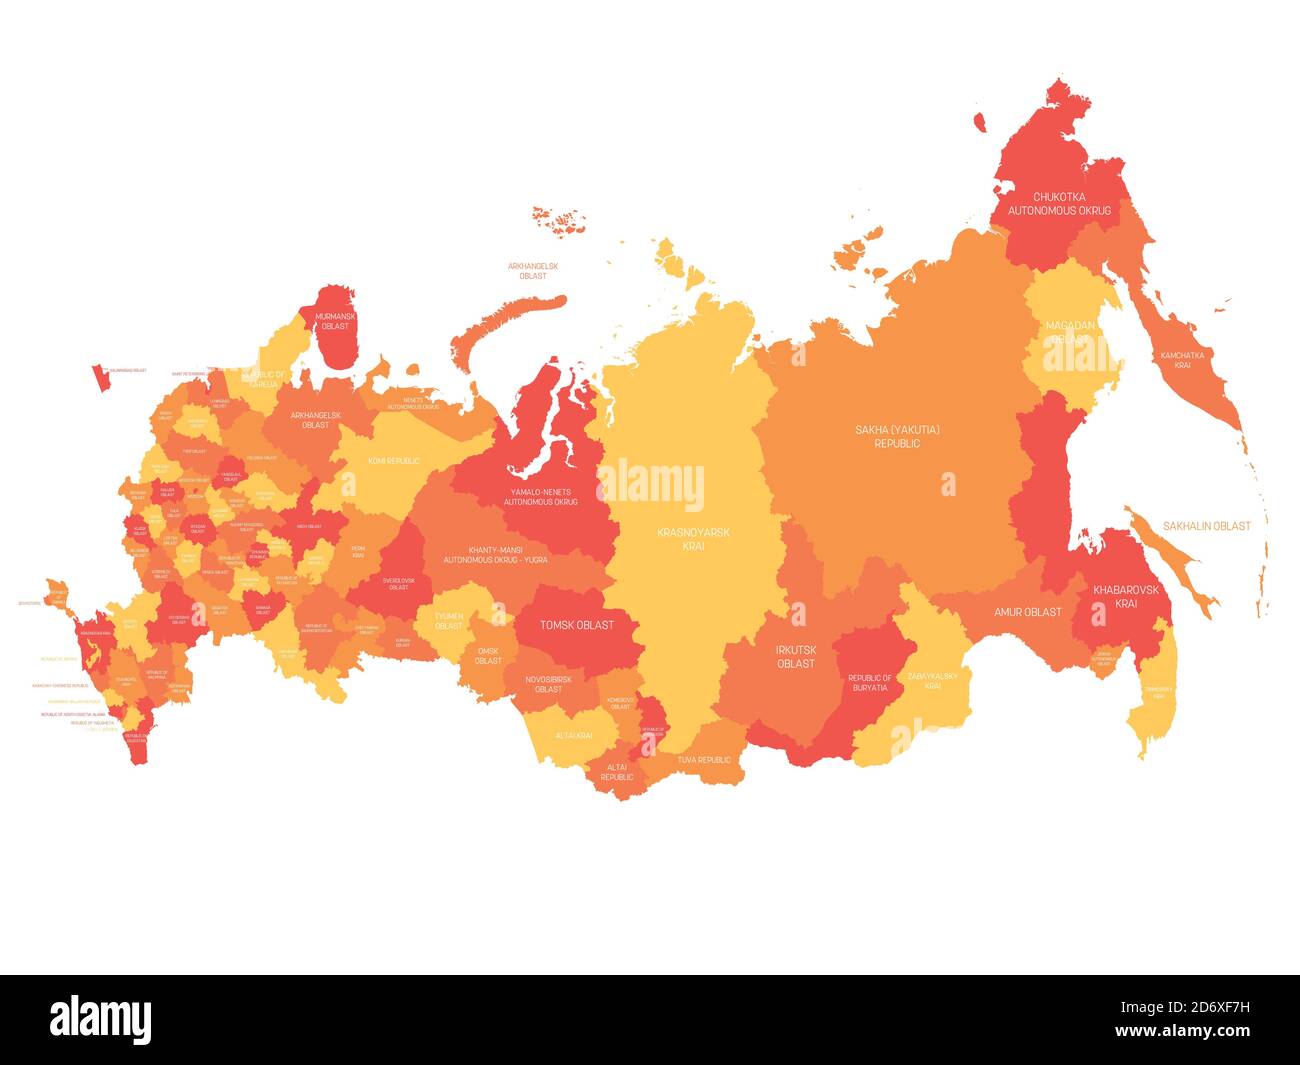 Orange political map of Russia, or Russian Federation. Federal subjects - republics, krays, oblasts, cities of federal significance, autonomous oblasts and autonomous okrugs. Simple flat vector map with labels. Stock Vector